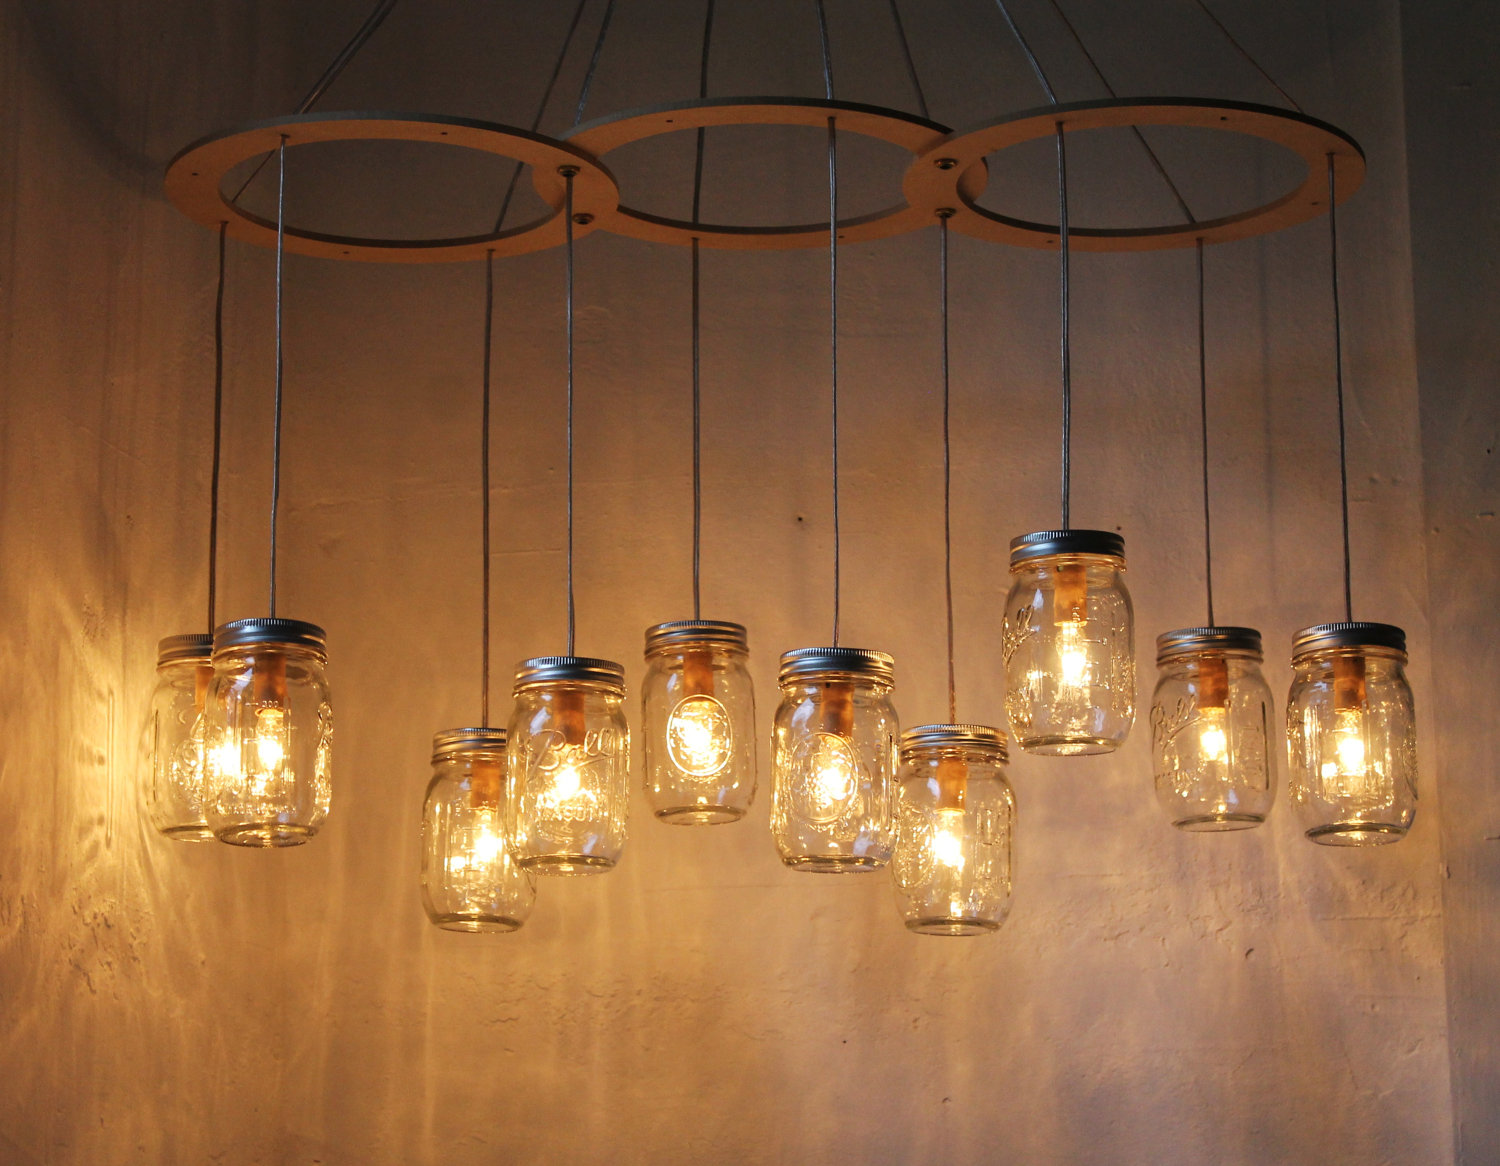 DIY Pendant Lights: How To Build Your Own Guide | EarlyExperts